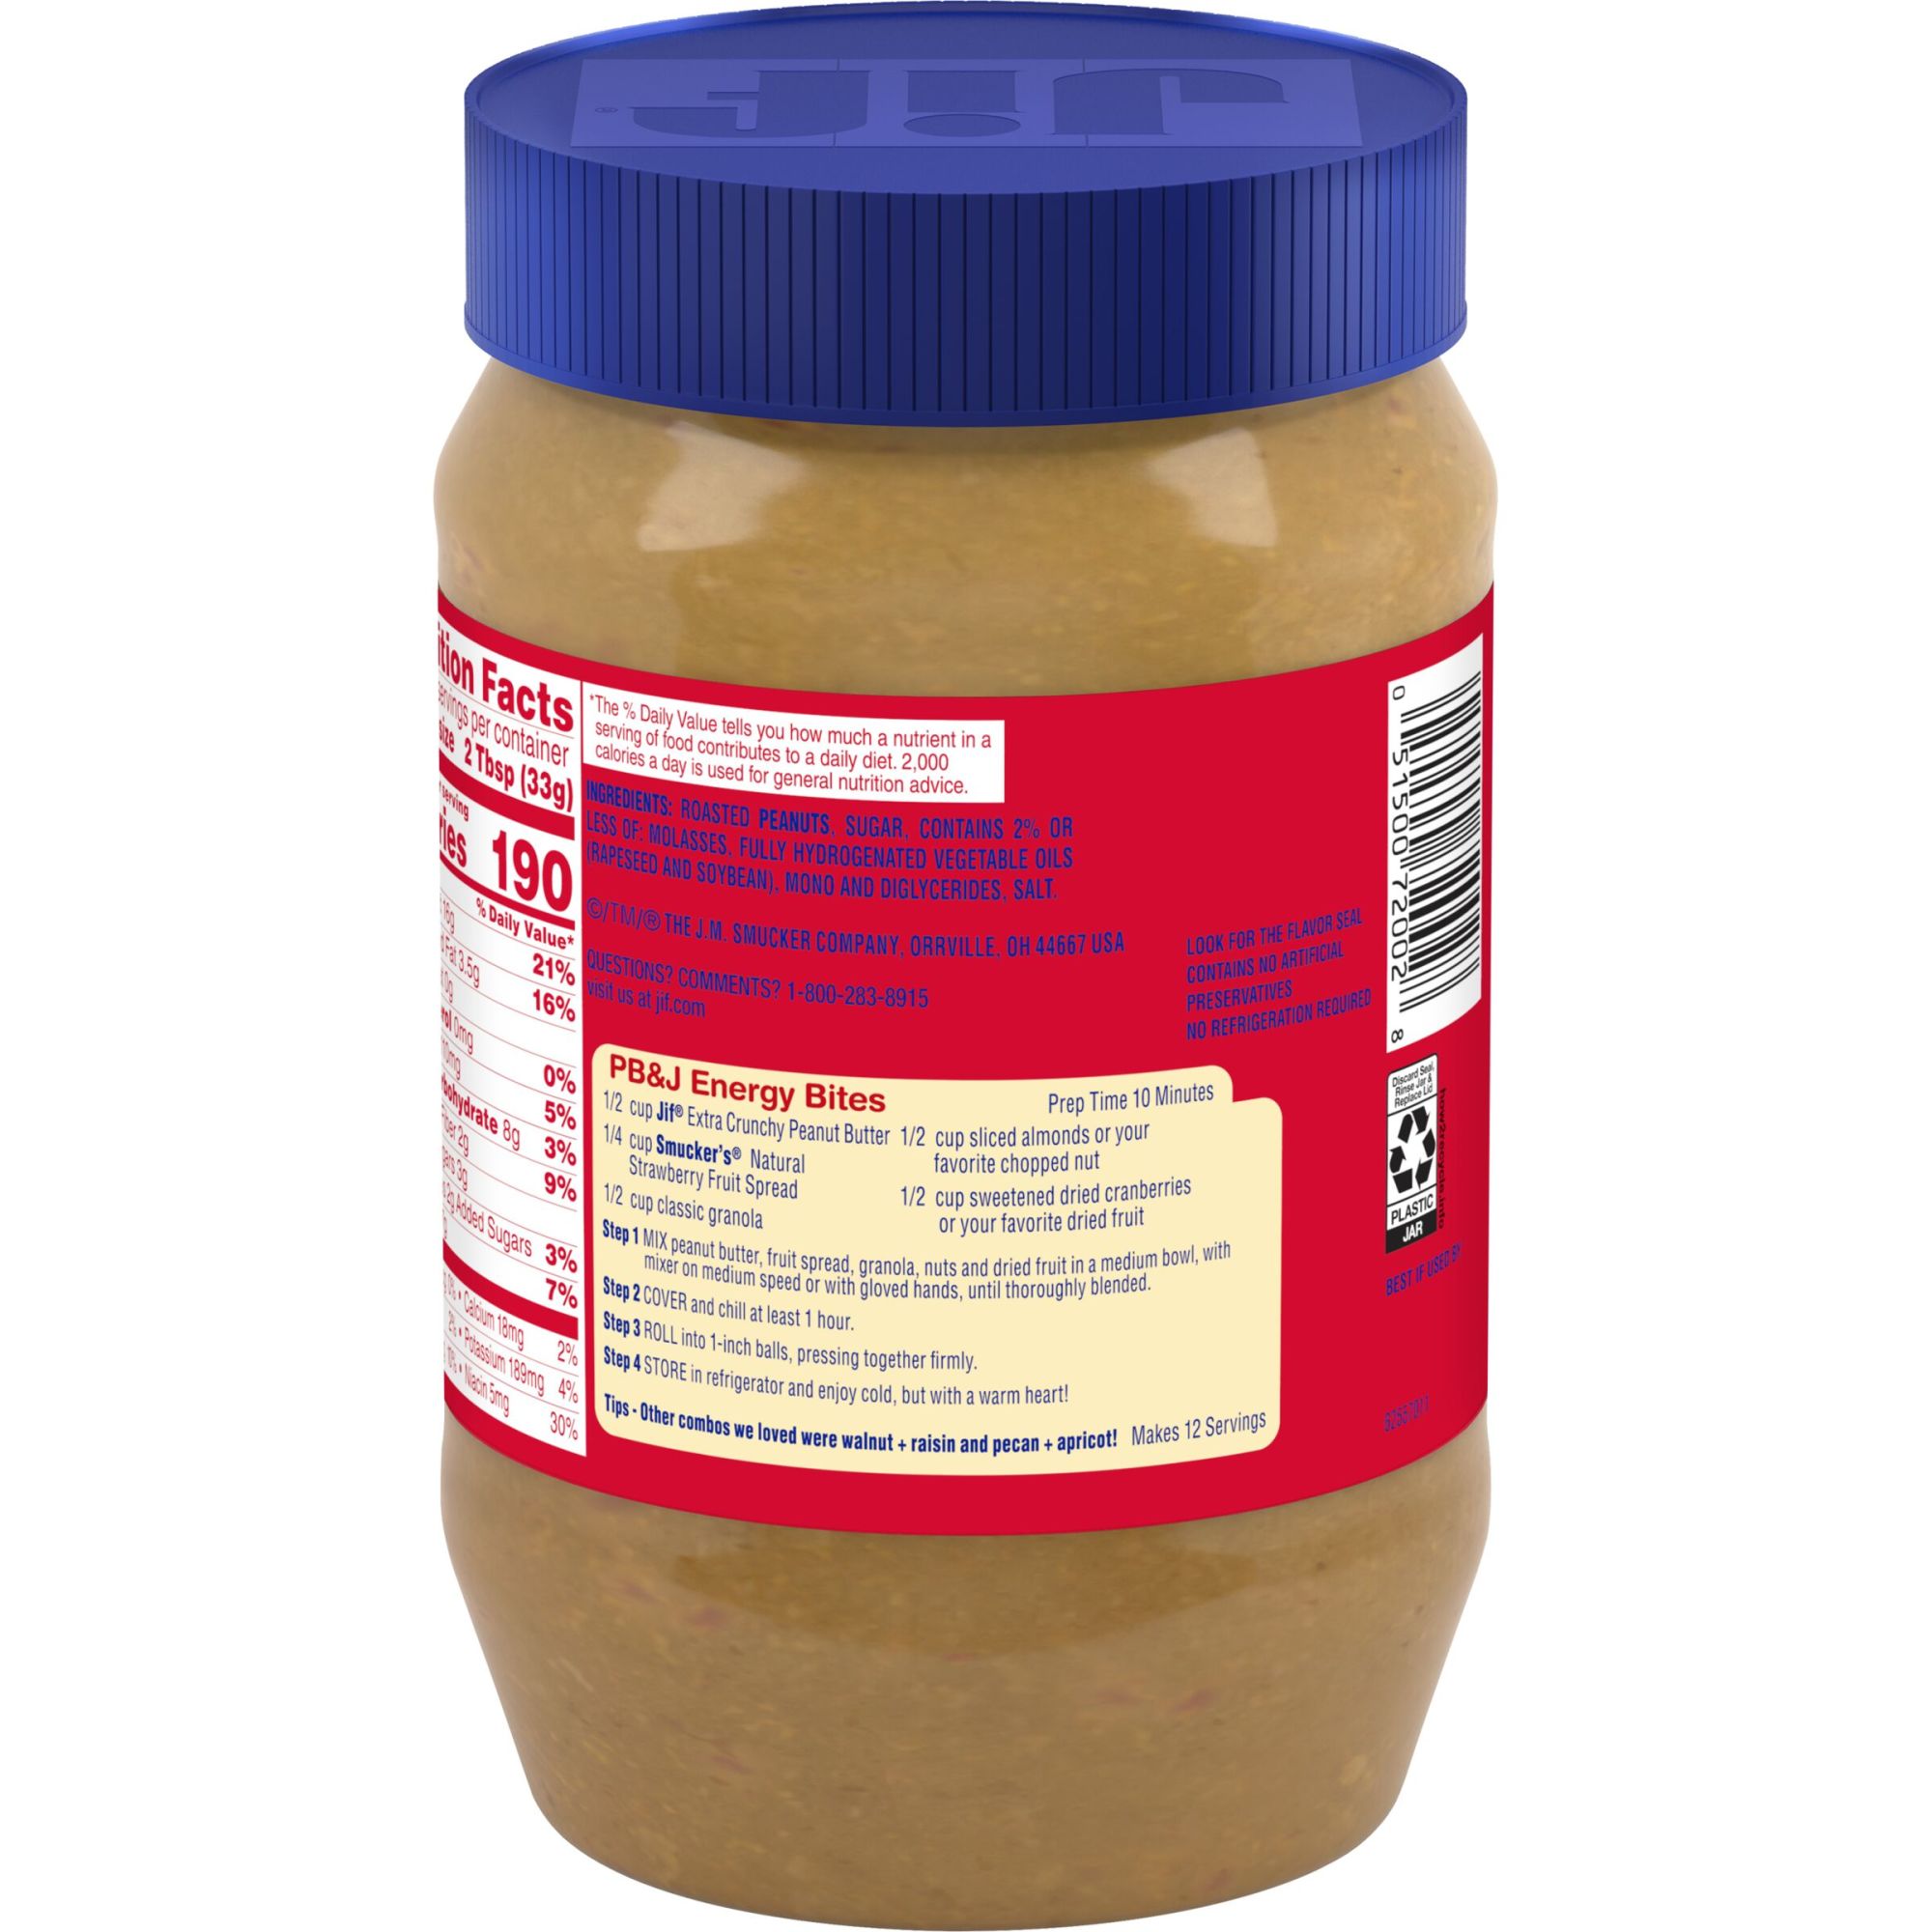 Jif Extra Crunchy Peanut Butter, 40-Ounce Jar - image 3 of 8